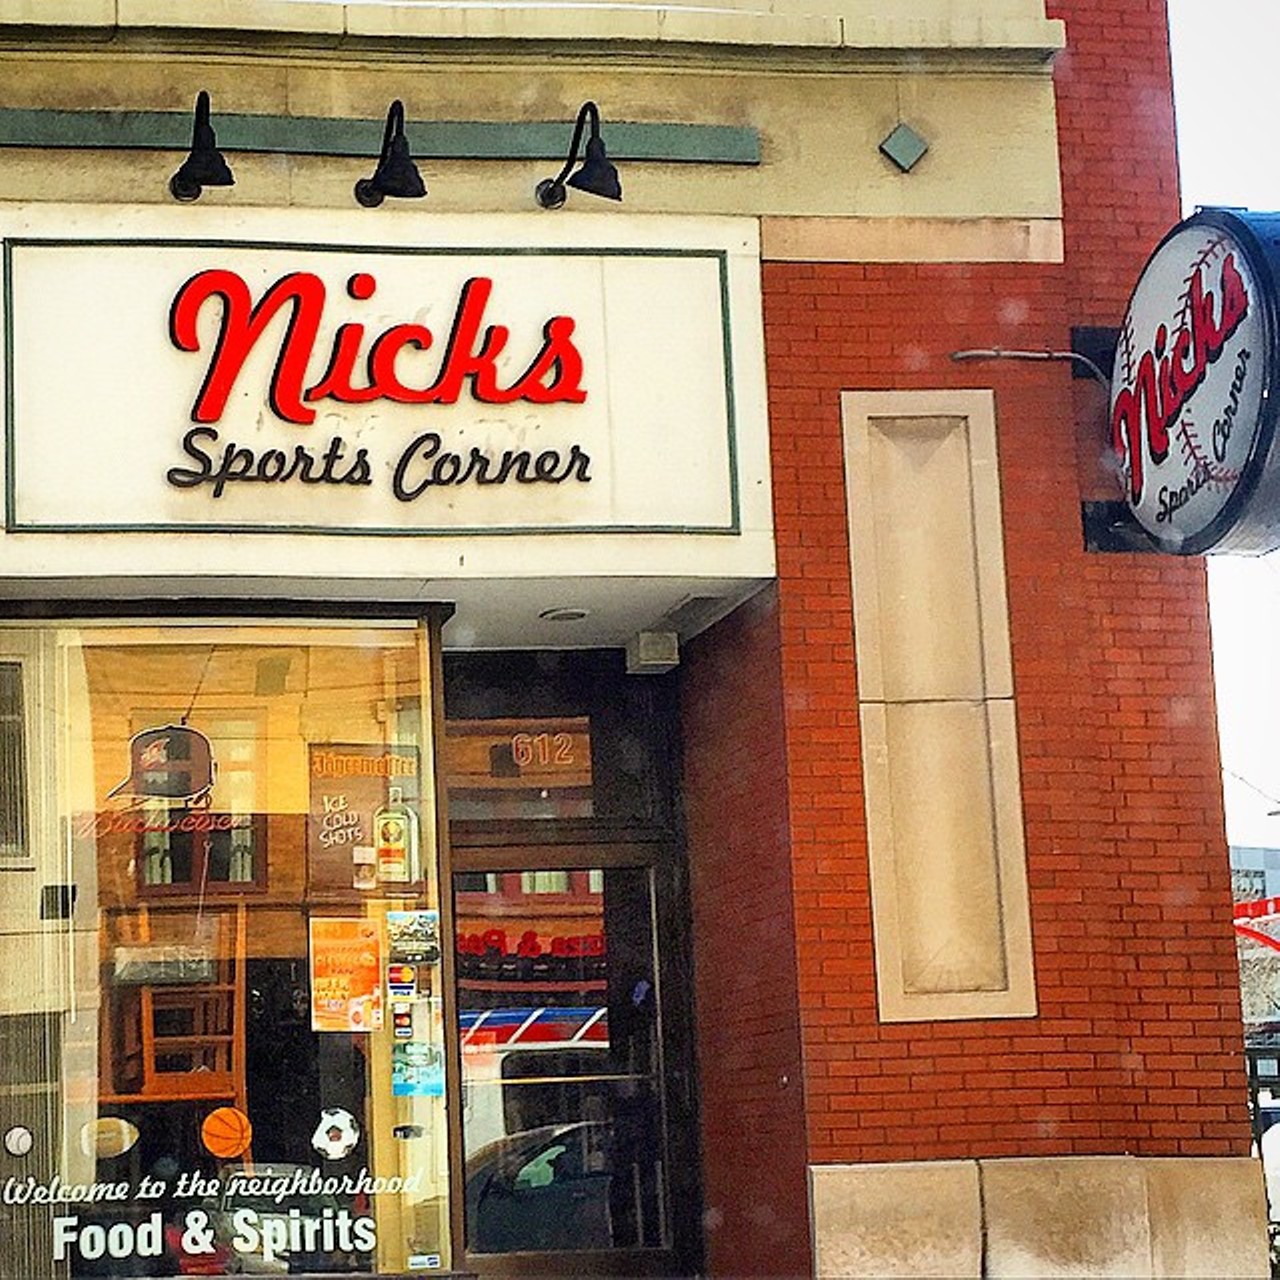 NICK&#146;S SPORTS CORNER, 612 PROSPECT AVE.When: Doors open at 11 a.m.What: A neighborhood bar in downtown Cleveland, Nick&#146;s Sports Corner is for the laid-back fans. Nick&#146;s Sports Corner&#146;s drink selection will appeal to the masses without excessive cost. Why: An unassuming sign on an unassuming building really conveys the hole-in-the-wall vibe at Nick&#146;s Sports Corner. Nick&#146;s Sports Corner is the place you can reminisce about the glory days of Cleveland sports while hoping the Cavs make history in the NBA Finals. (Photo courtesy of Instagram user @clevenow.)